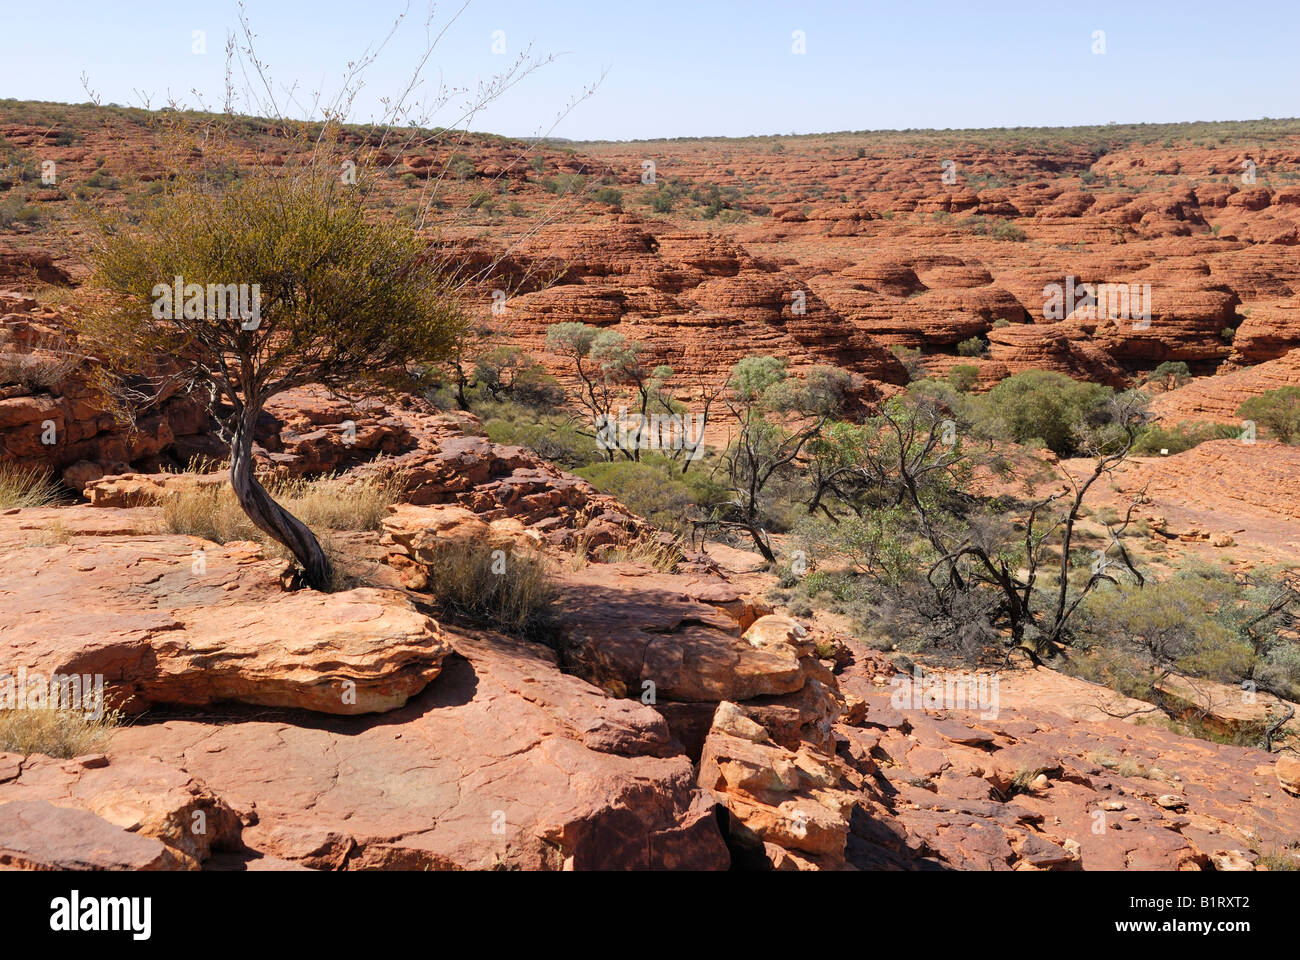 View of the Sandstone Domes of Lost City at the southern edge of Kings Canyon, Watarrka National Park, Northern Territory, Aust Stock Photo